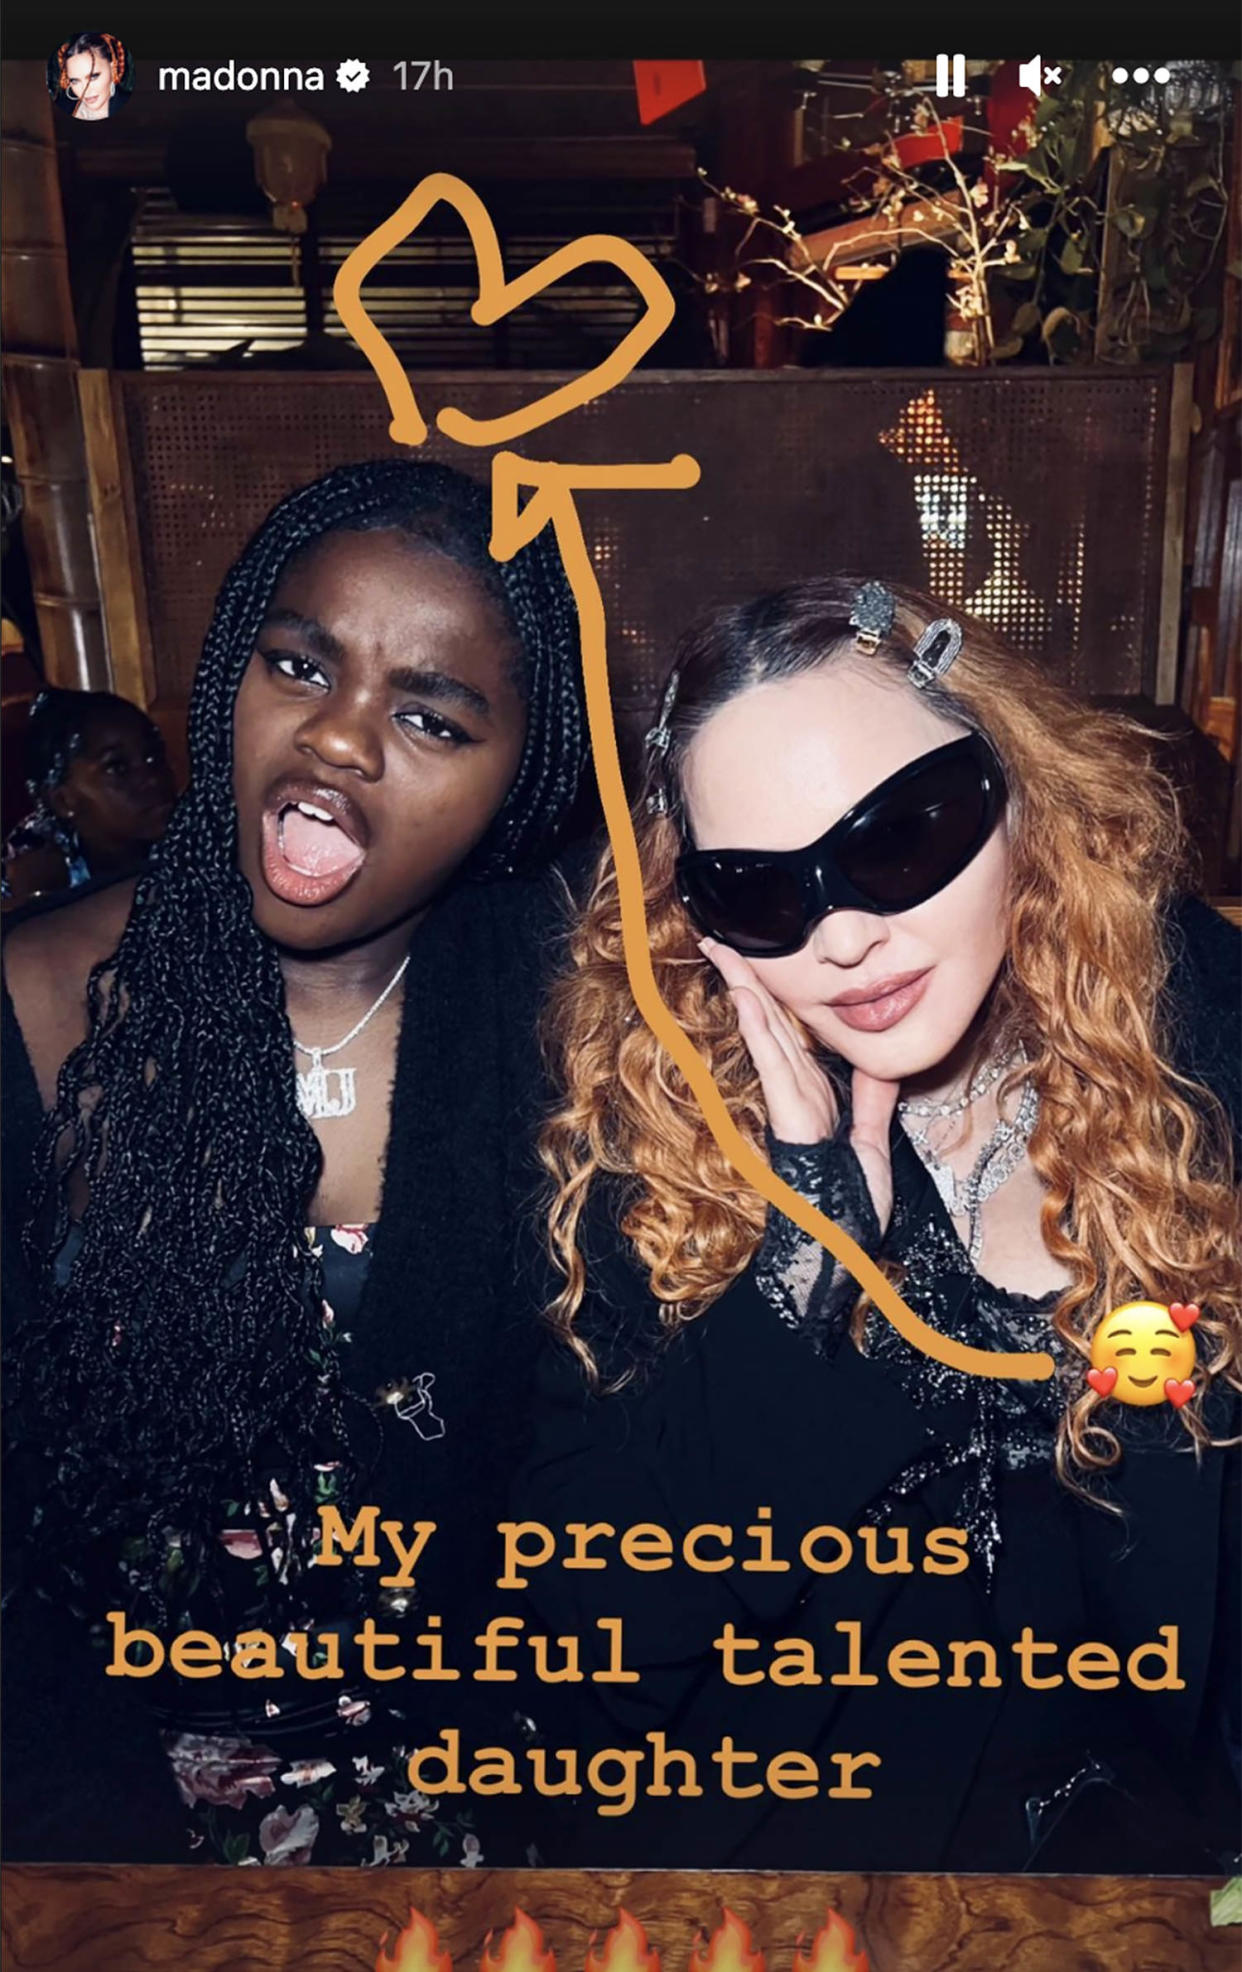 Madonna shares a sweet picture with her daughter Mercy James. (@madonna via Instagram)